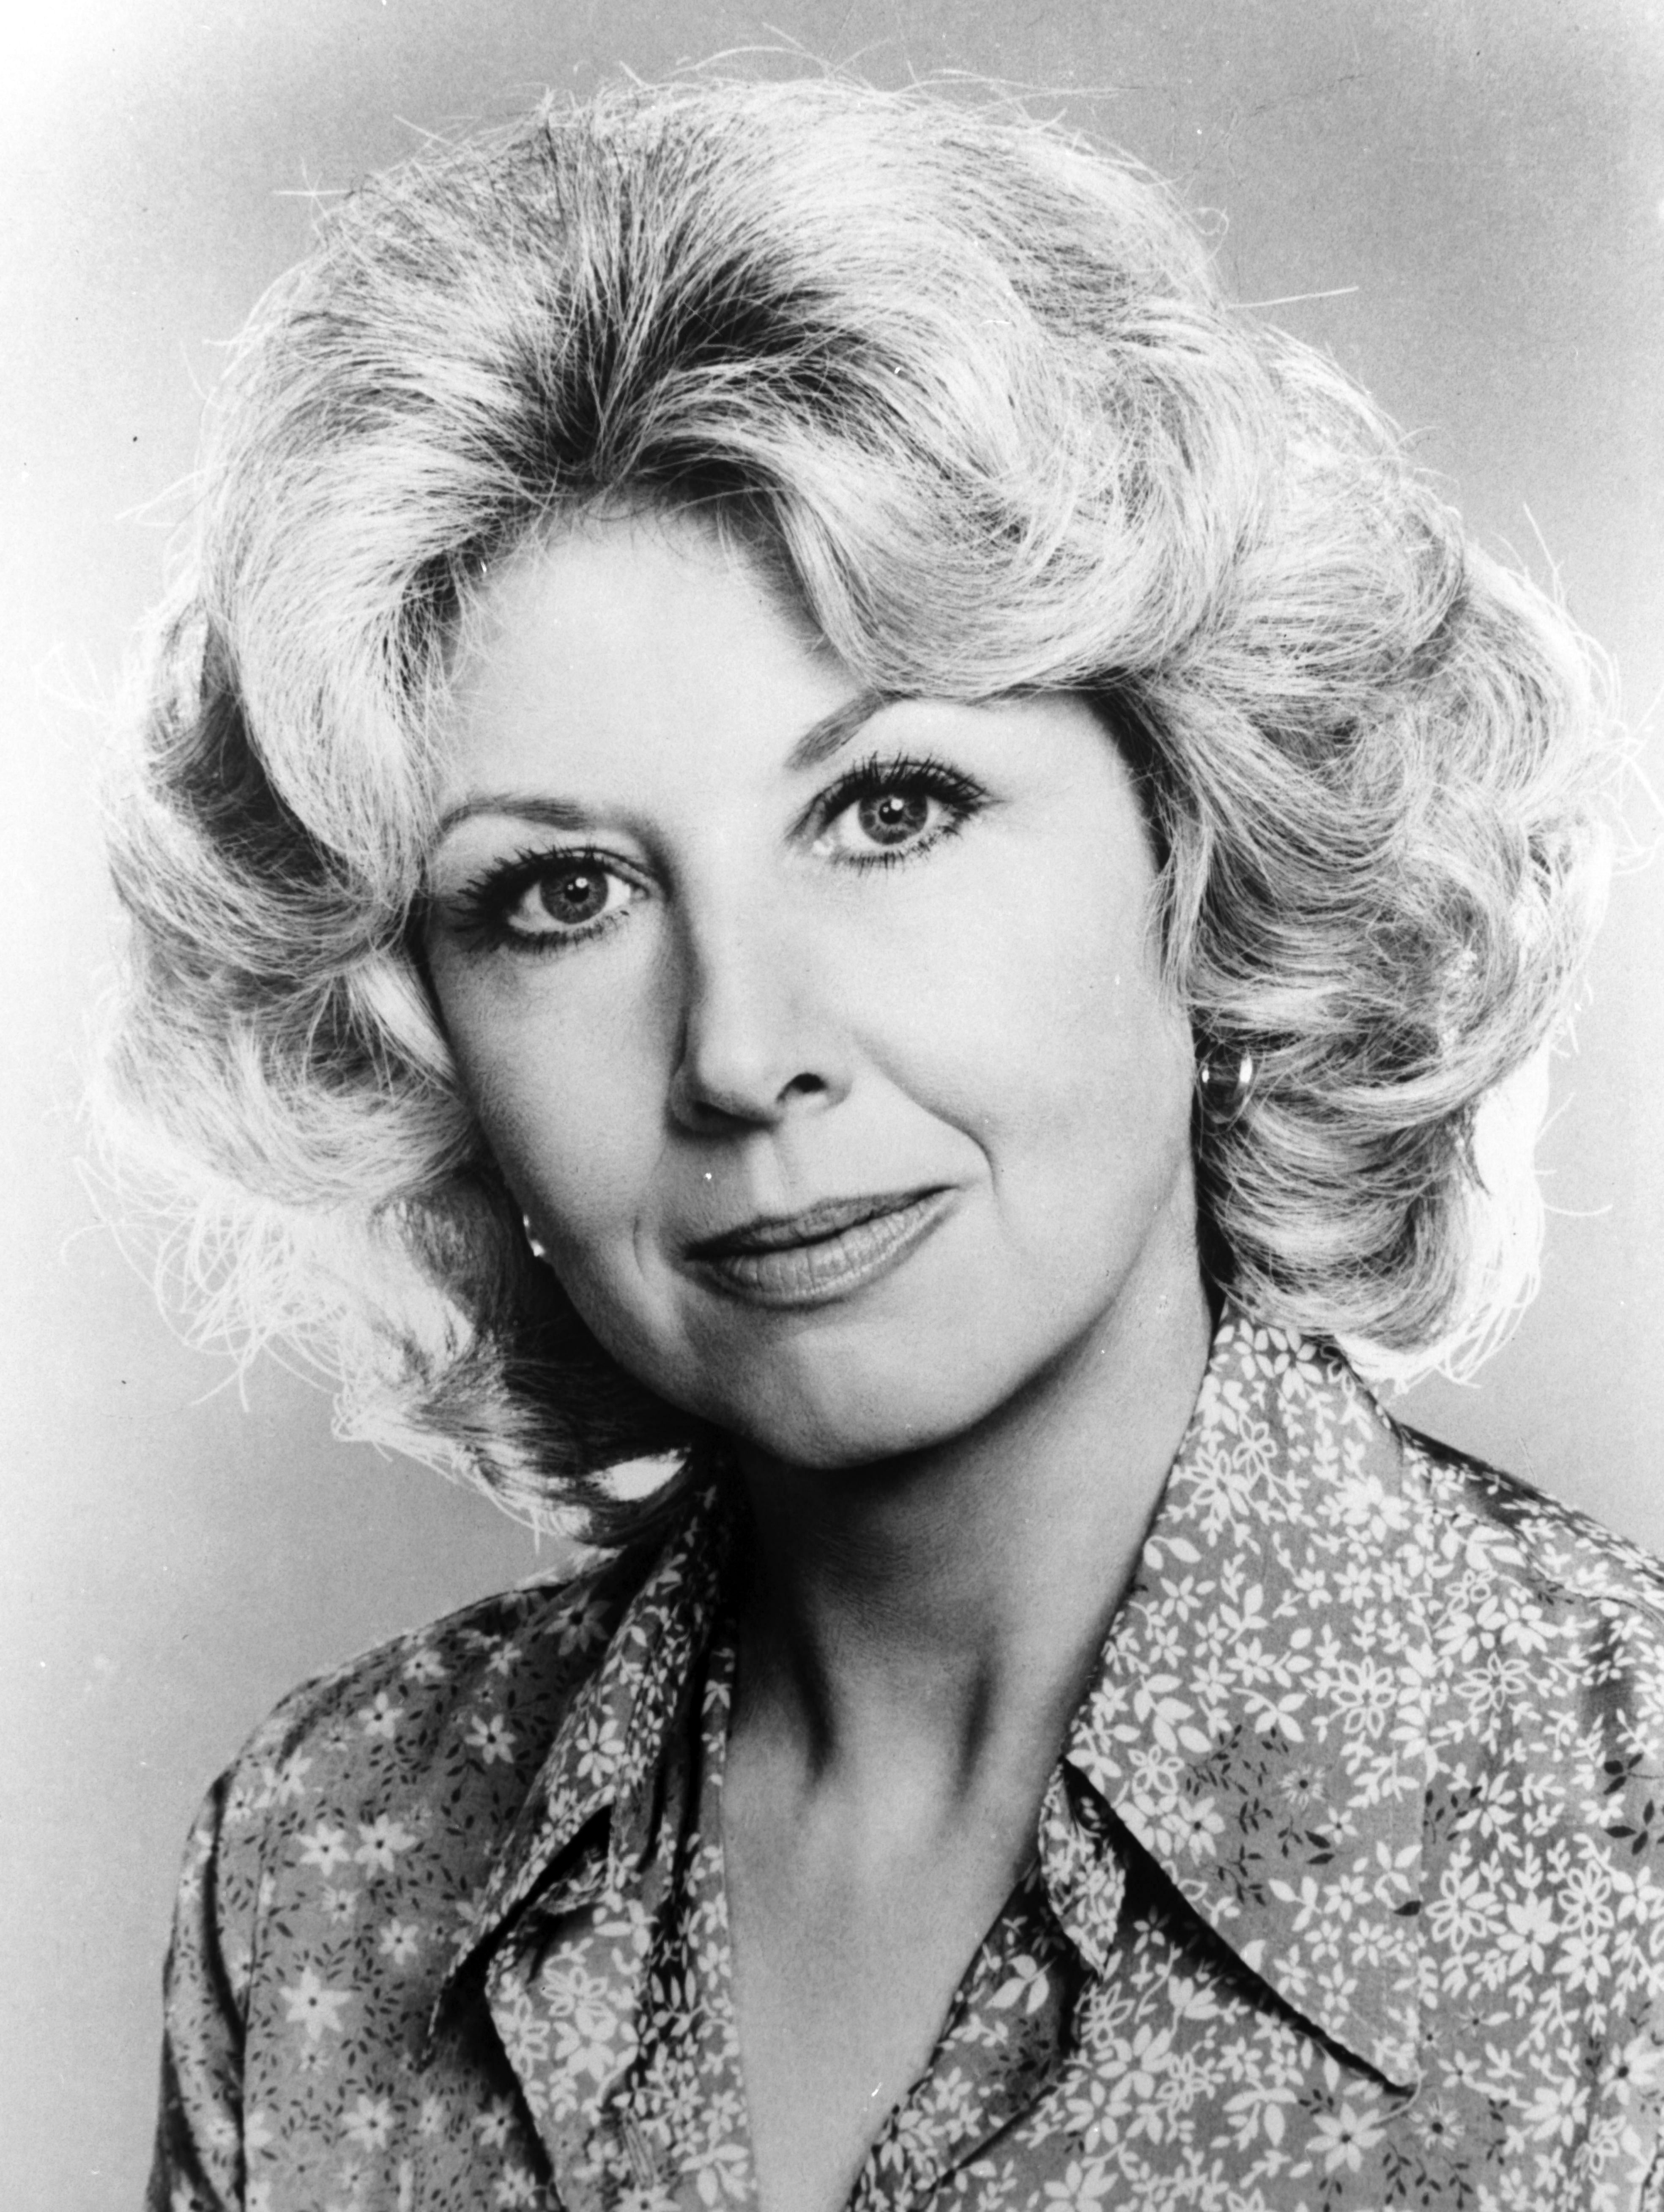 Michael Learned poses for a portrait in the 1970s. 